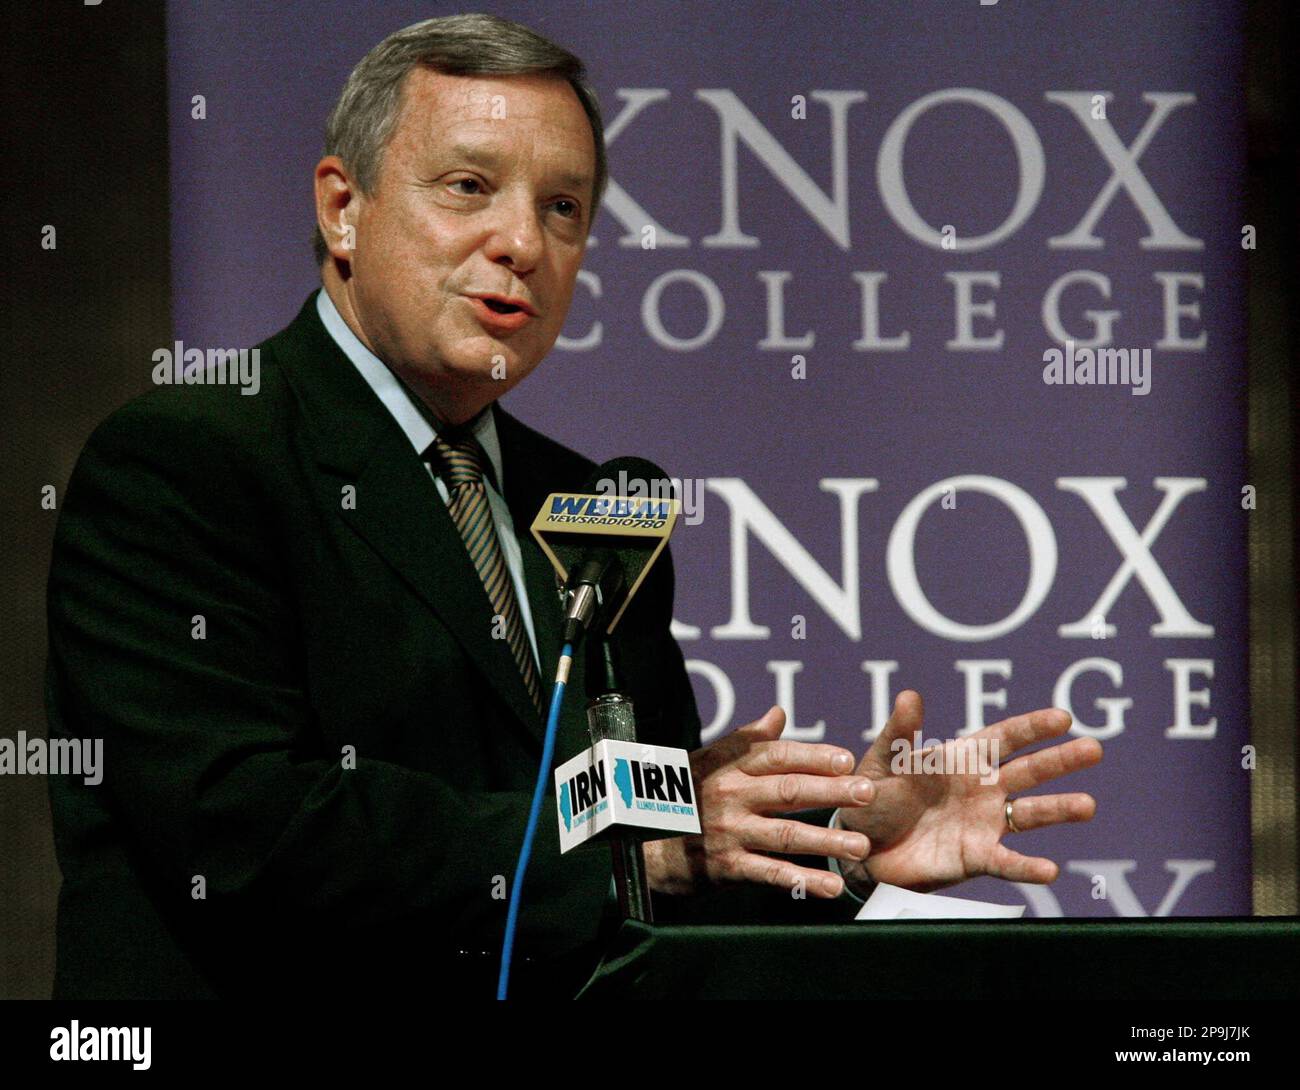 Sen. Dick Durbin, D-Ill., answers a question during a live radio debate with Republican challenger Steve Sauerberg , Thursday night, Oct. 9, 2008 in Kresge Hall in the Ford Center for the Fine Arts at Knox College in Galesburg, Ill. (AP Photo/The Register-Mail, Bill Gaither) Stock Photo